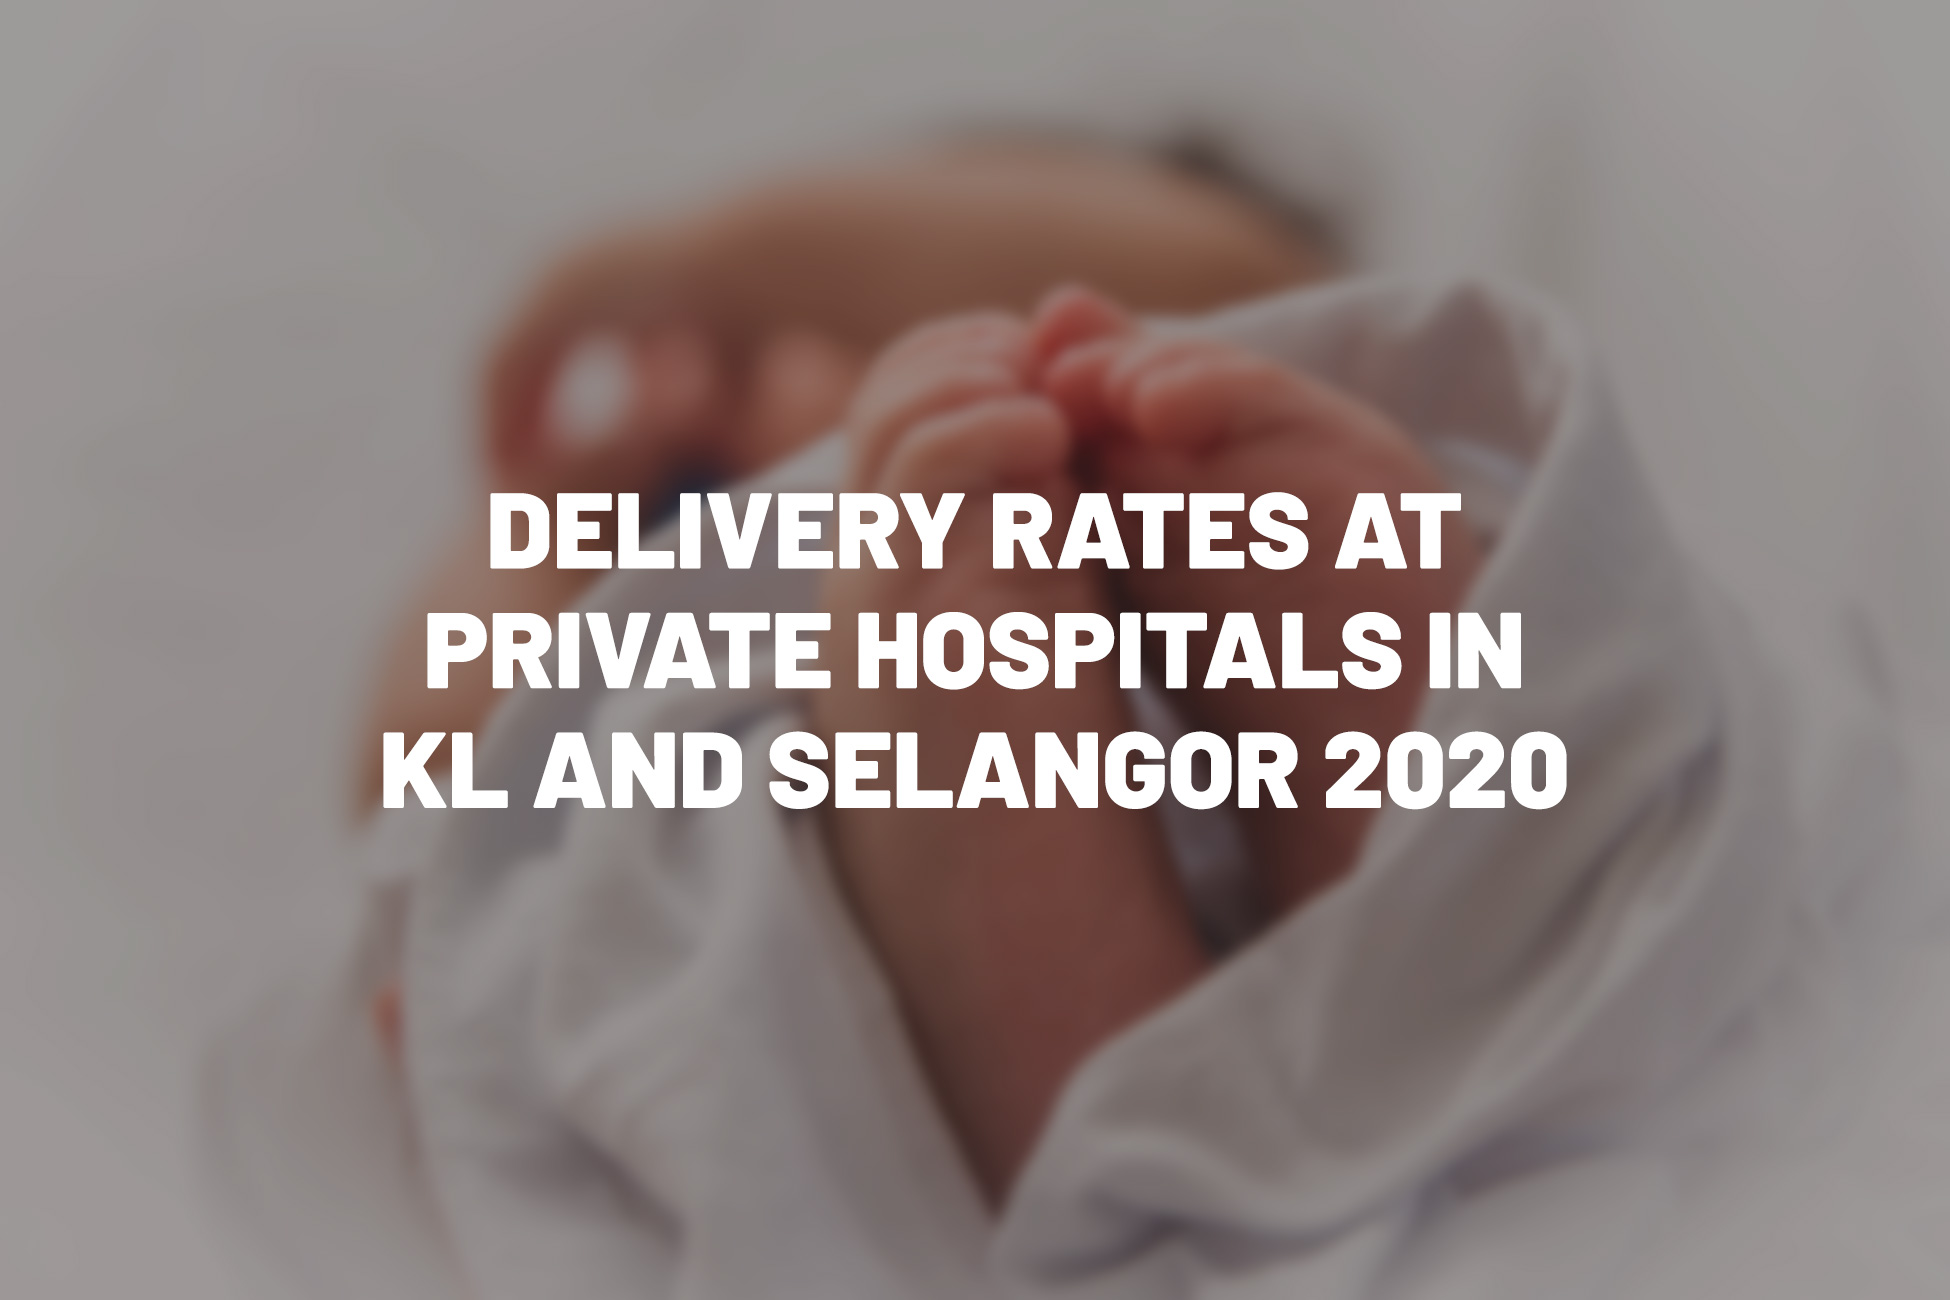 Delivery Rates at Private Hospitals in KL and Selangor 2020